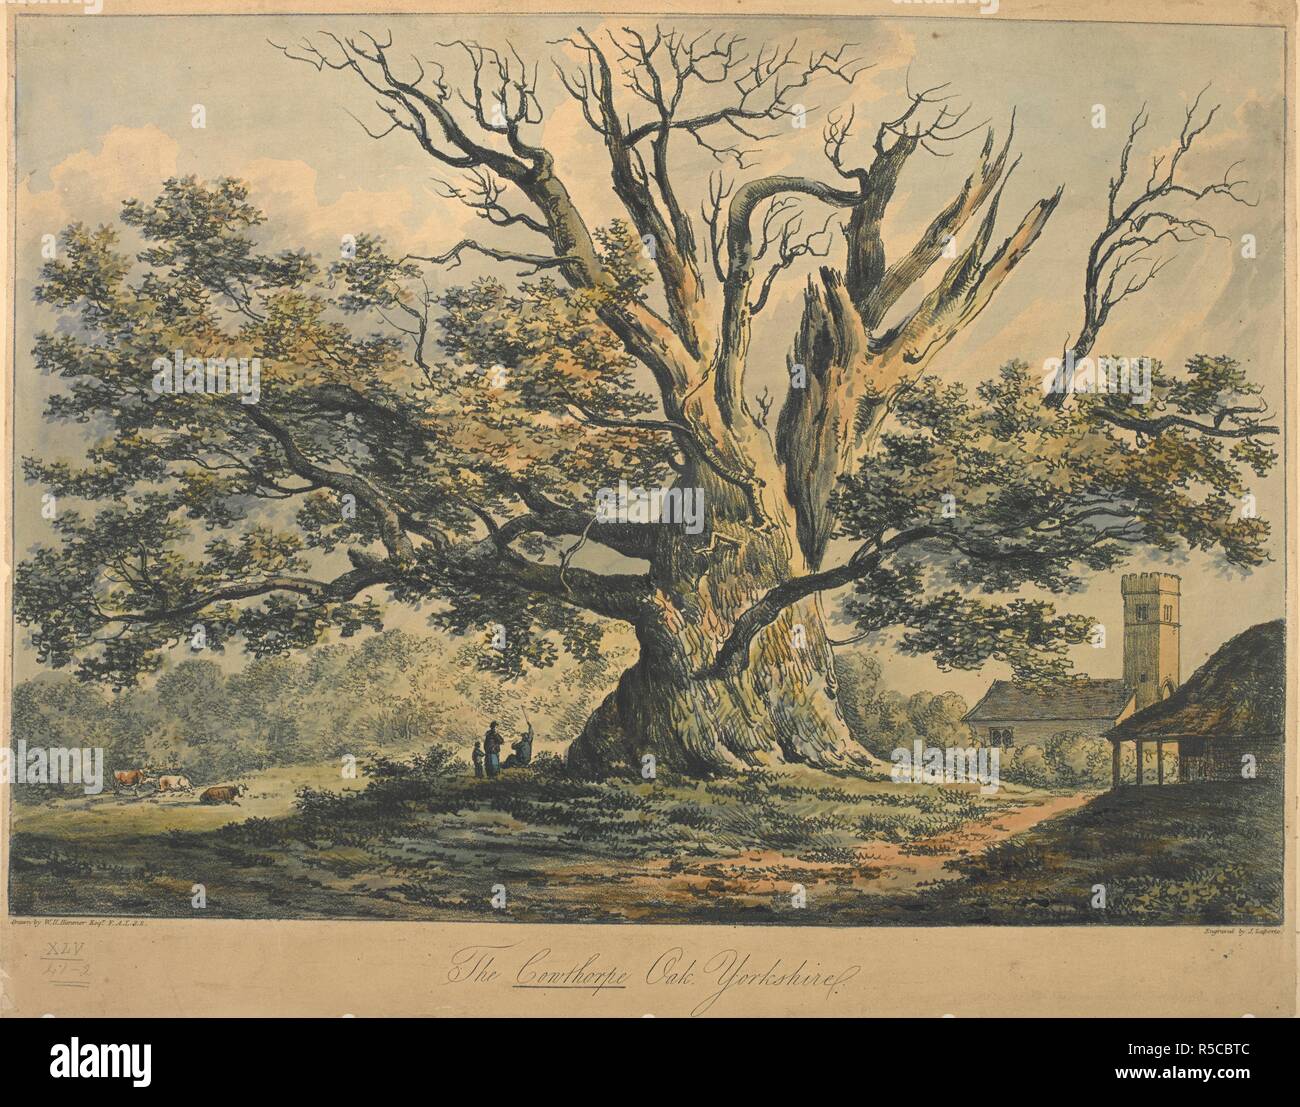 The Cowthorpe Oak, Yorkshire. Figures standing beneath the Cowthorpe Oak, Yorkshire; cattle on the left-hand side; St Michael's Church, Cowthorpe on the right-hand side; trees in the background. The Cowthorpe Oak was once the largest oak in Britain. . The Cowthorpe Oak, Yorkshire. / Drawn by W.H. Hanmer Esqr F.A.L.S.S. ; Engraved by J. Laporte. John Laporte, 1761-1839, printmaker, publisher. [London] [Publish'd Sep.r 1, 1806, by J. Laporte, 21 Winchester Row, Edgware Road.], [September 1 1806]. 1 print : soft-ground etching with hand-colouring ; sheet 33 x 41.5 cm sheet. Source: Maps K.Top.45. Stock Photo